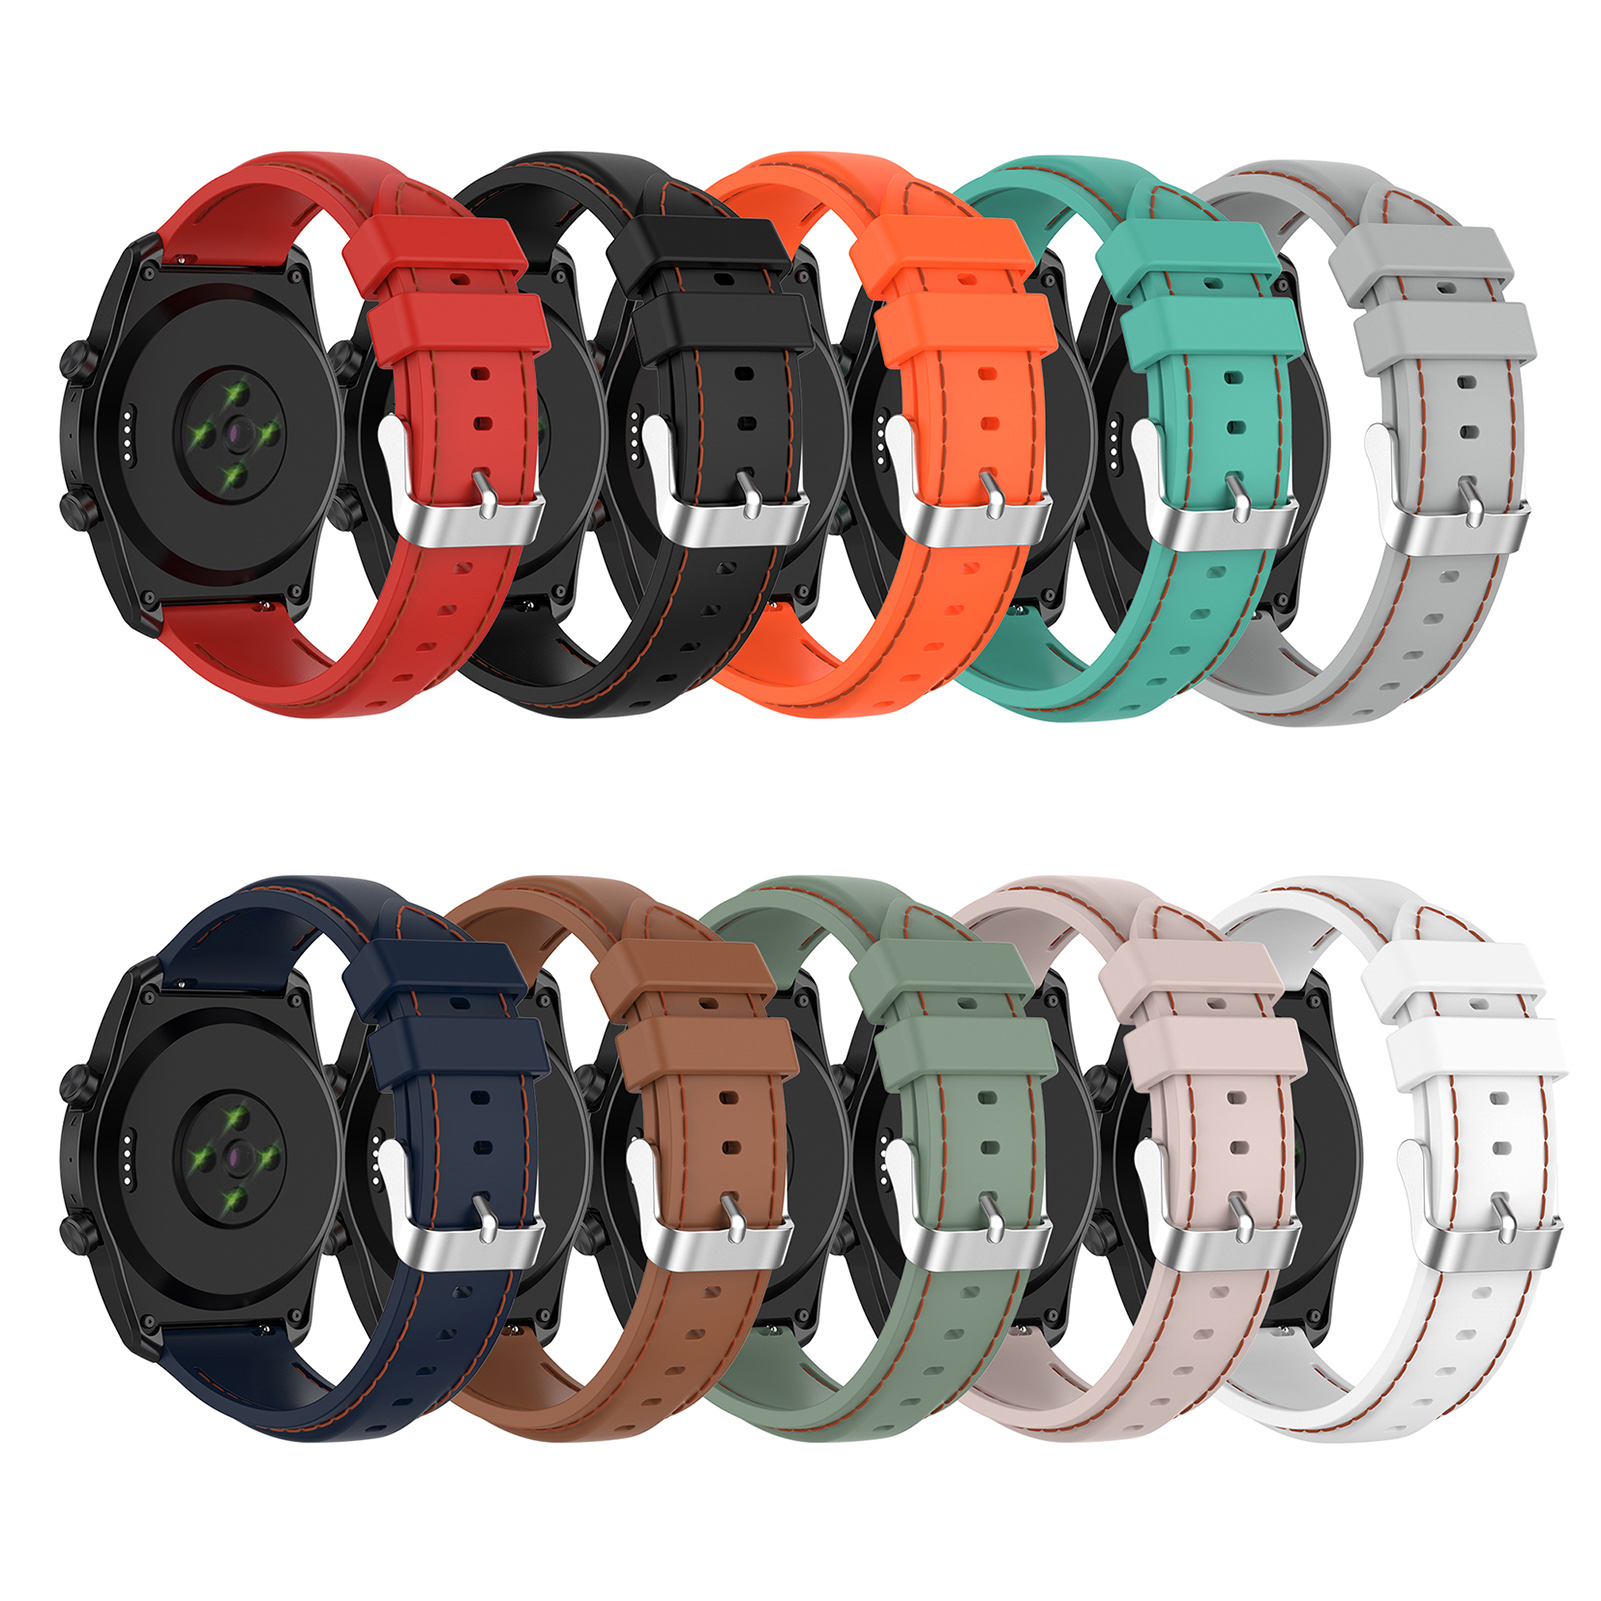 22mm-Soft-Silicone-Watch-Strap-Band-Replacement-Sport-Bracelet-Watchband-For-Ticwatch-Pro3LTE-Haylou-1809083-3